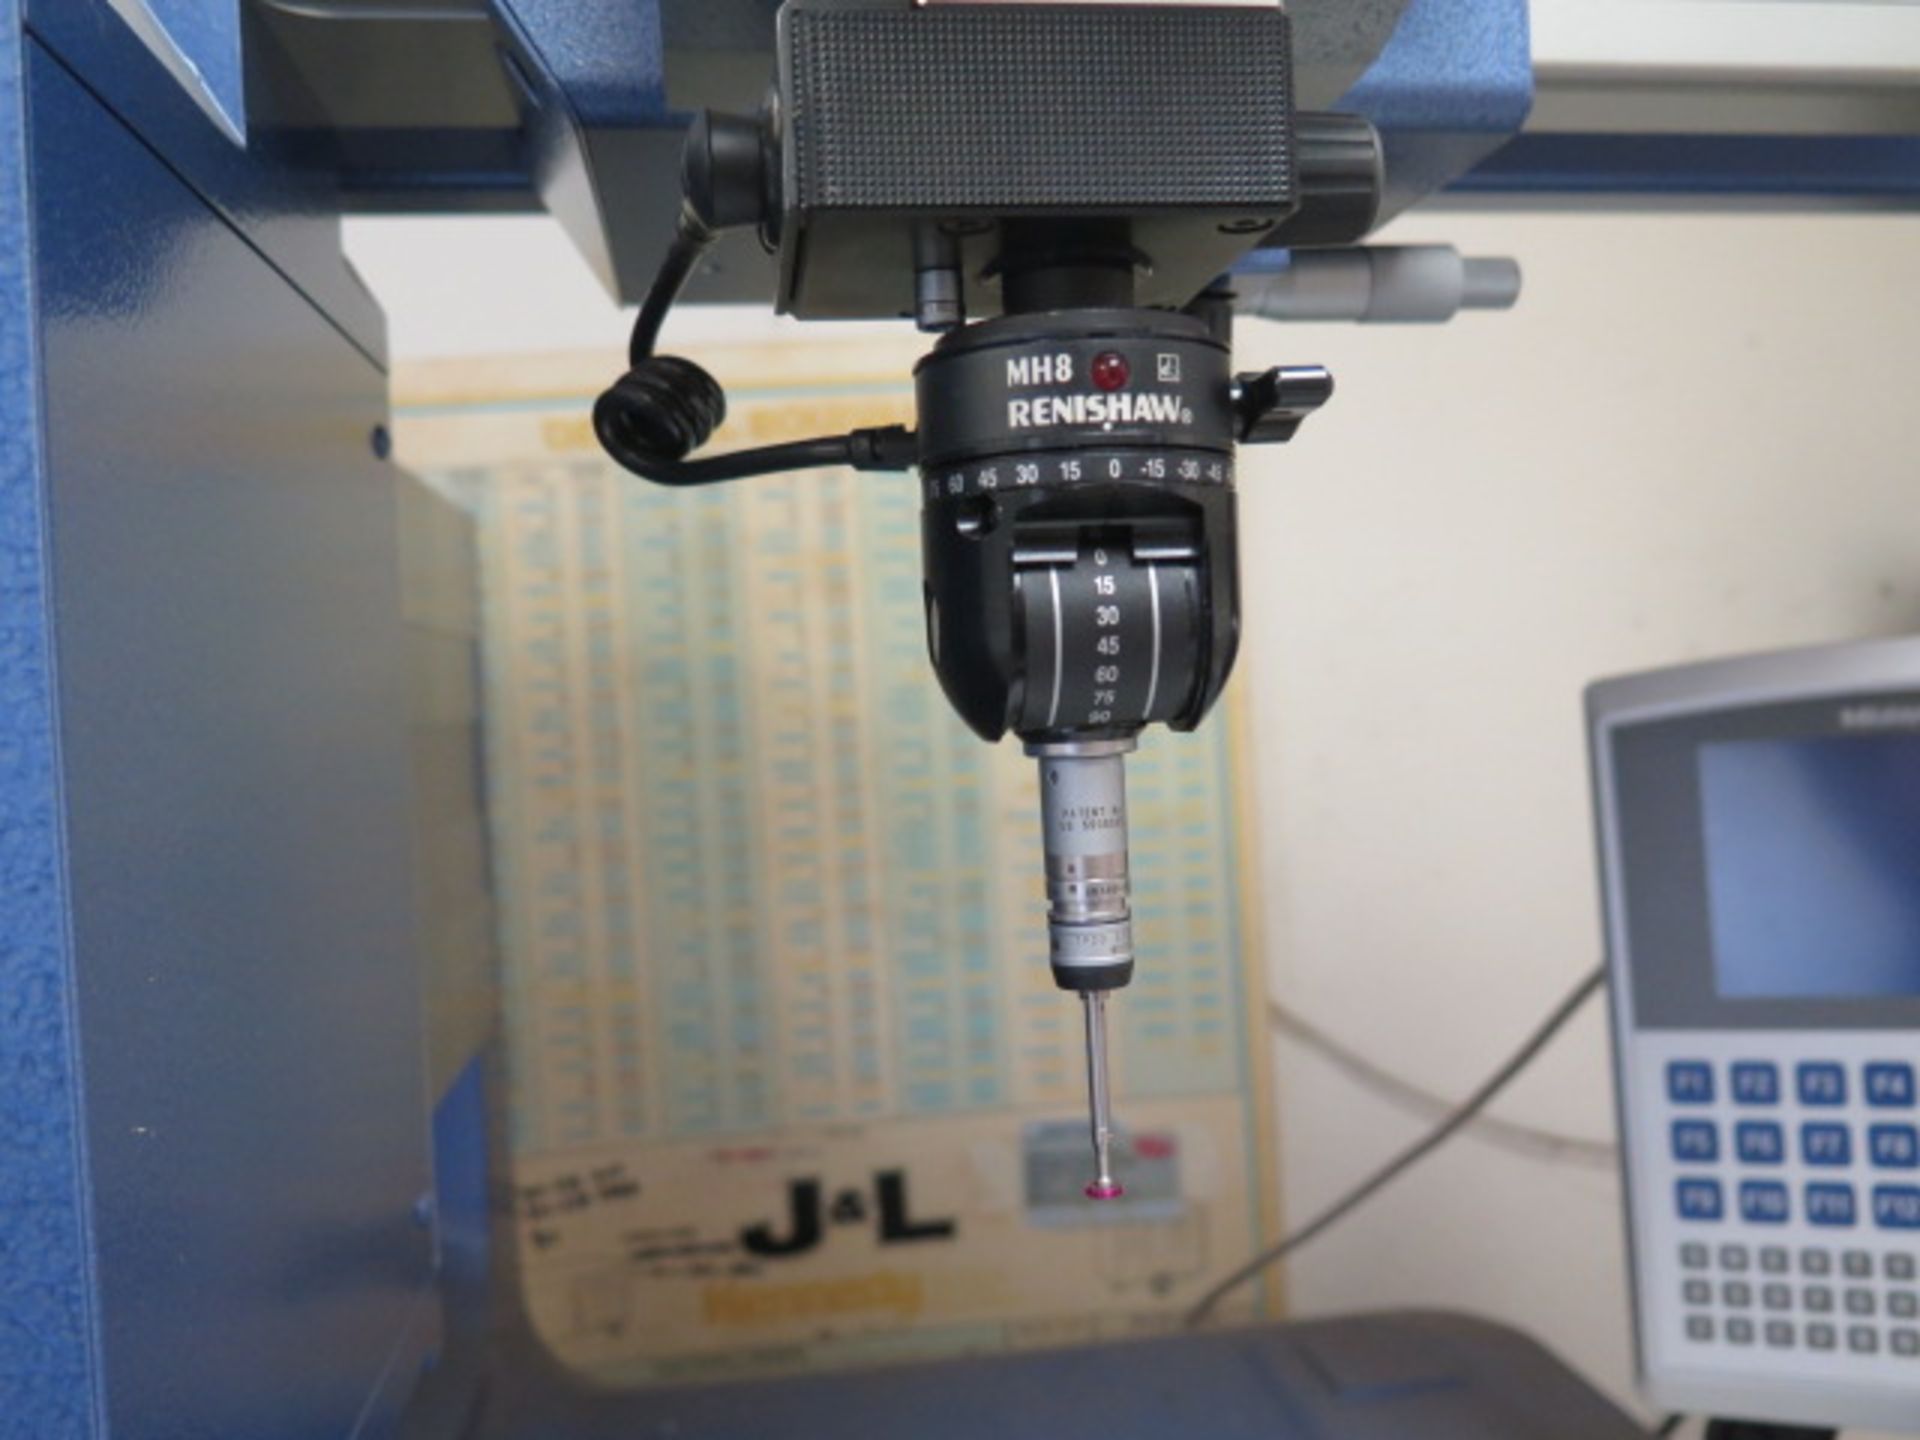 Mitutoyo QM-Measure 353 CMM Machine s/n BC000134 w/ Renishaw MH8 Probe Head, SOLD AS IS - Image 7 of 13